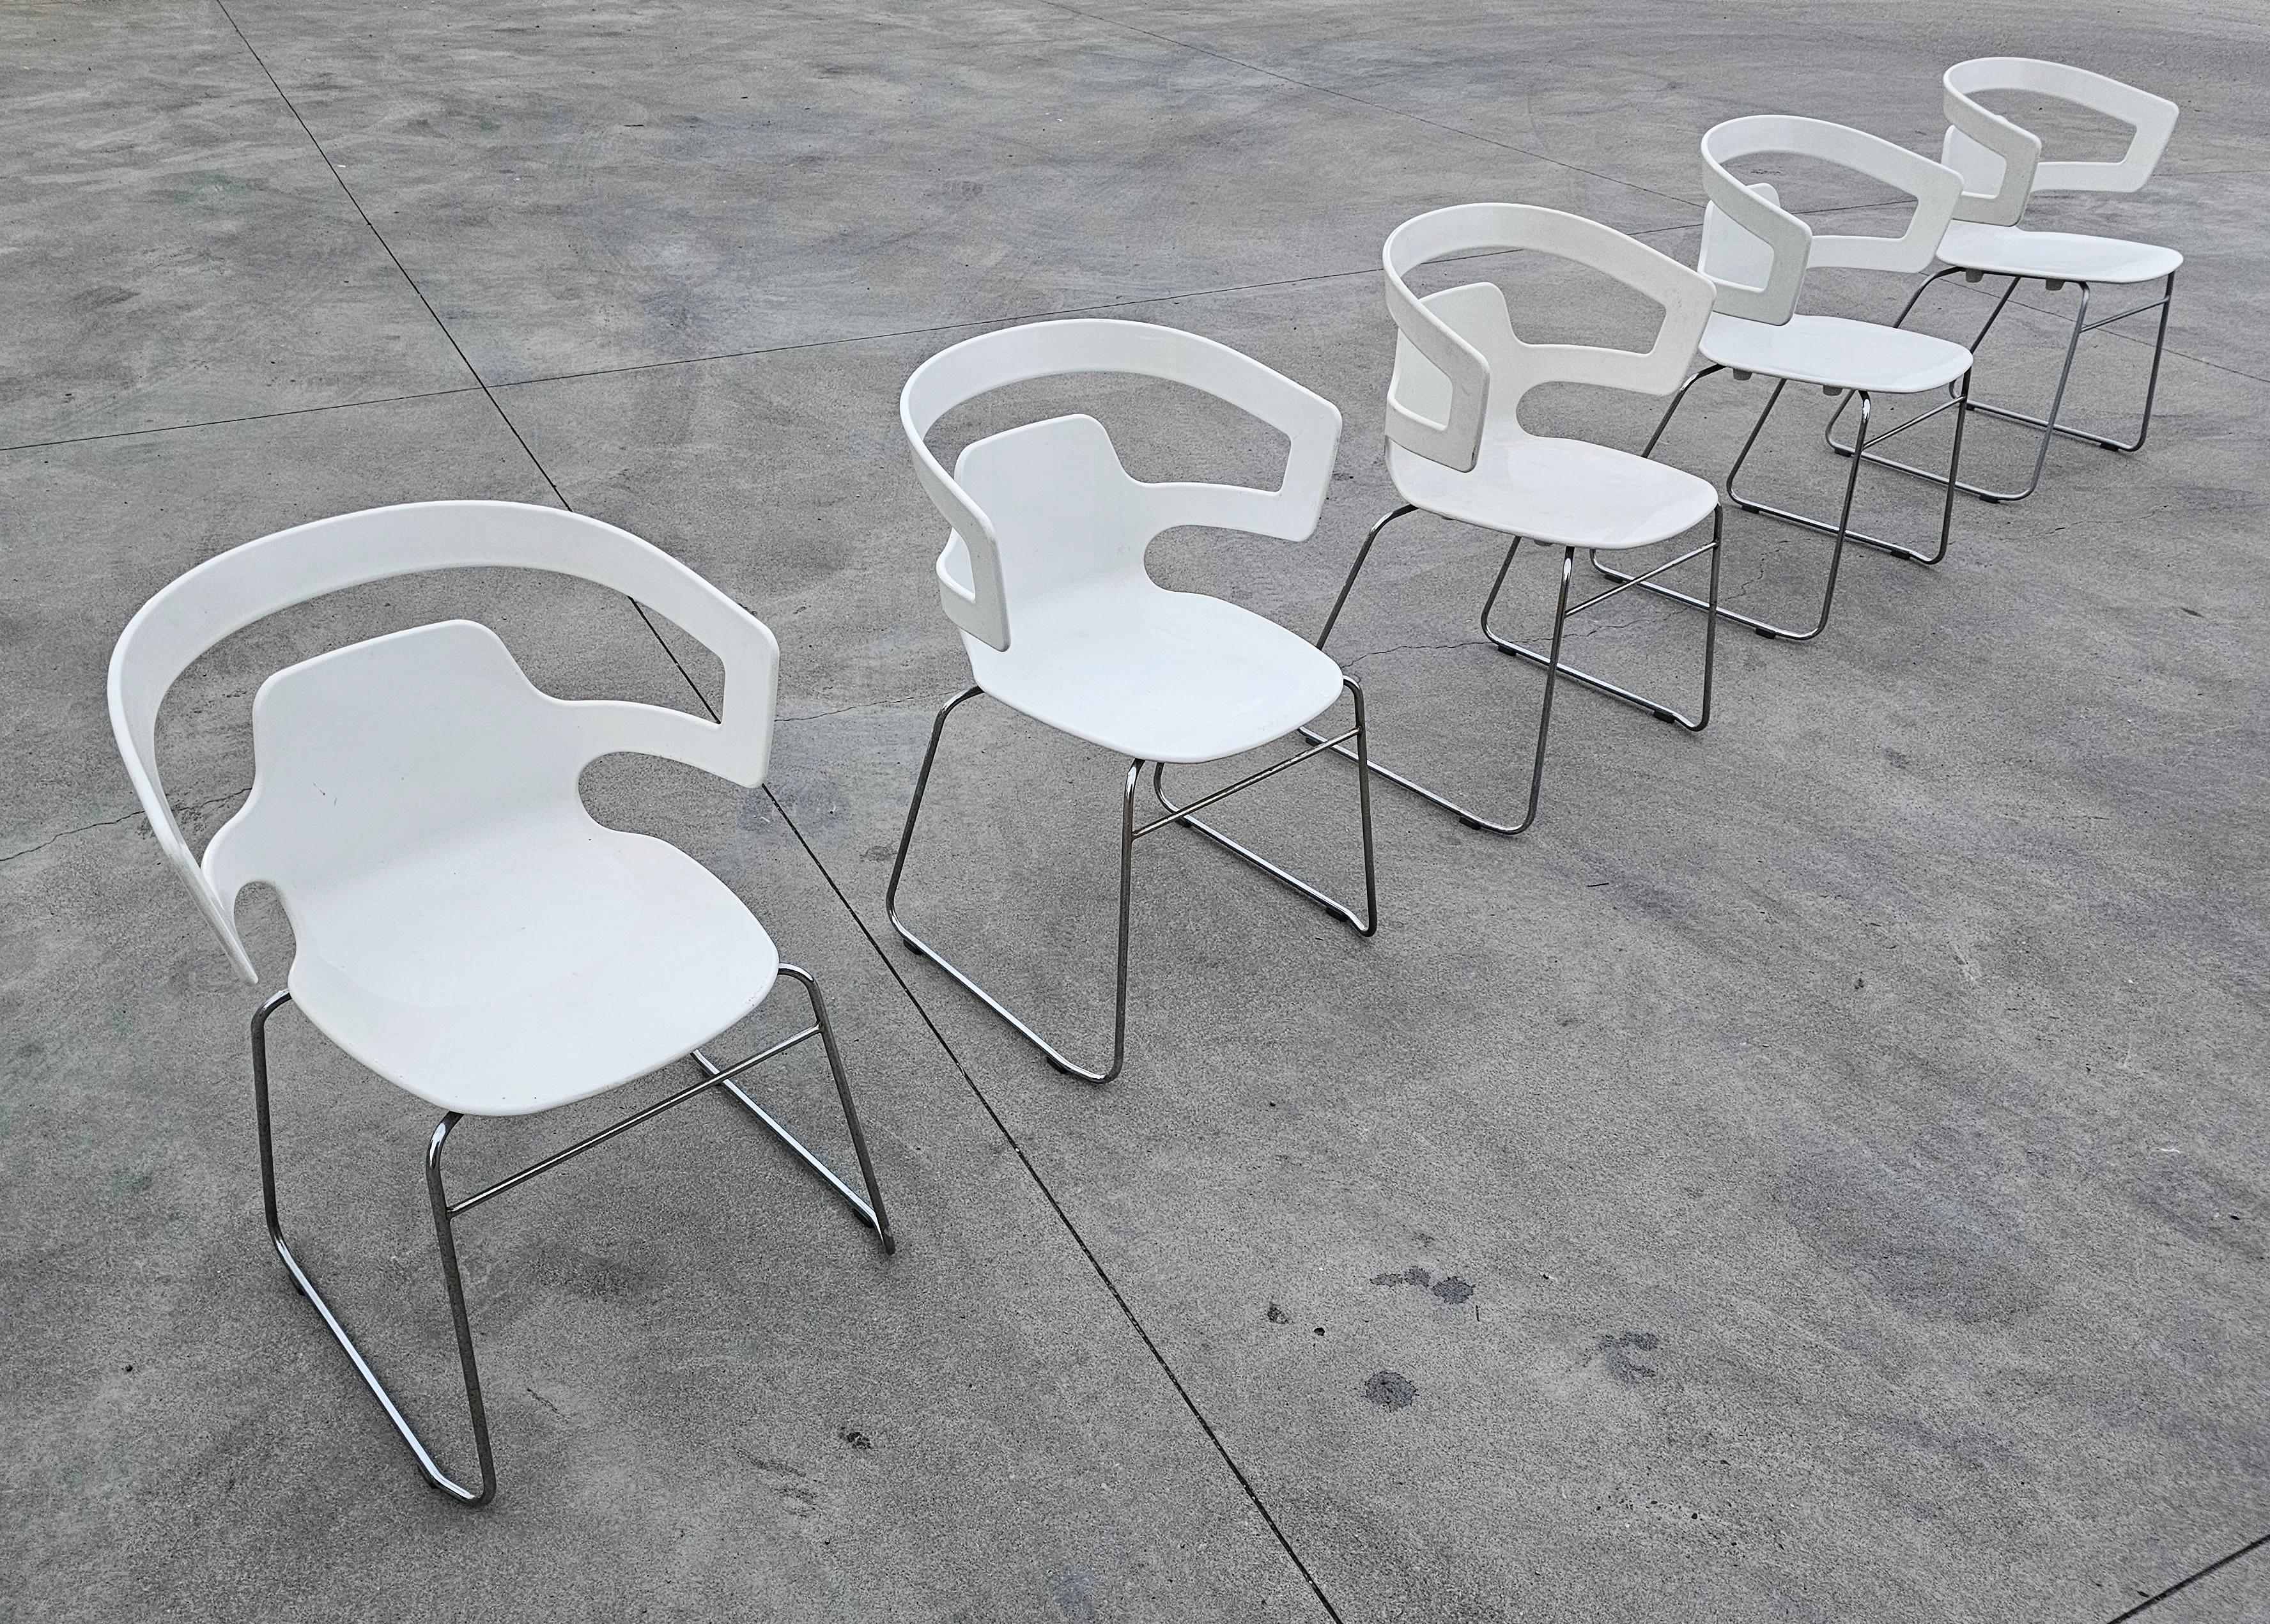 In this listing you will find Postmodern Garden Dining Chairs, model Segesta 501 designed by Alfredo Häberli for Alias. Segesta is a sledge chair with armrests, shell done in structure white plastic, and base in steel. The chairs are stackable and